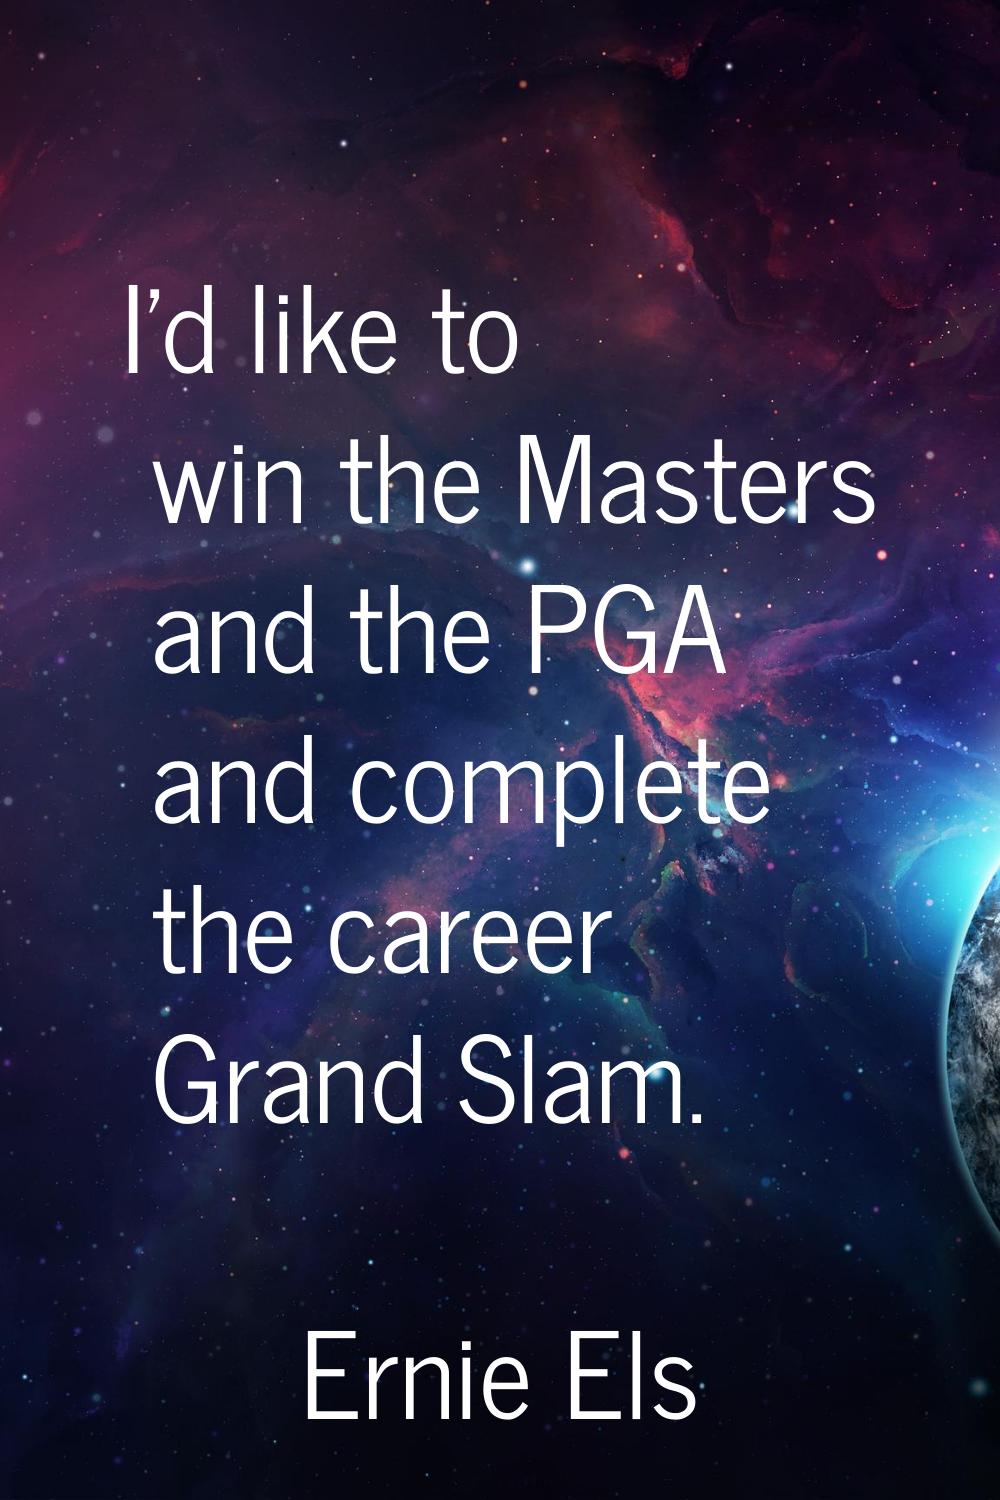 I'd like to win the Masters and the PGA and complete the career Grand Slam.